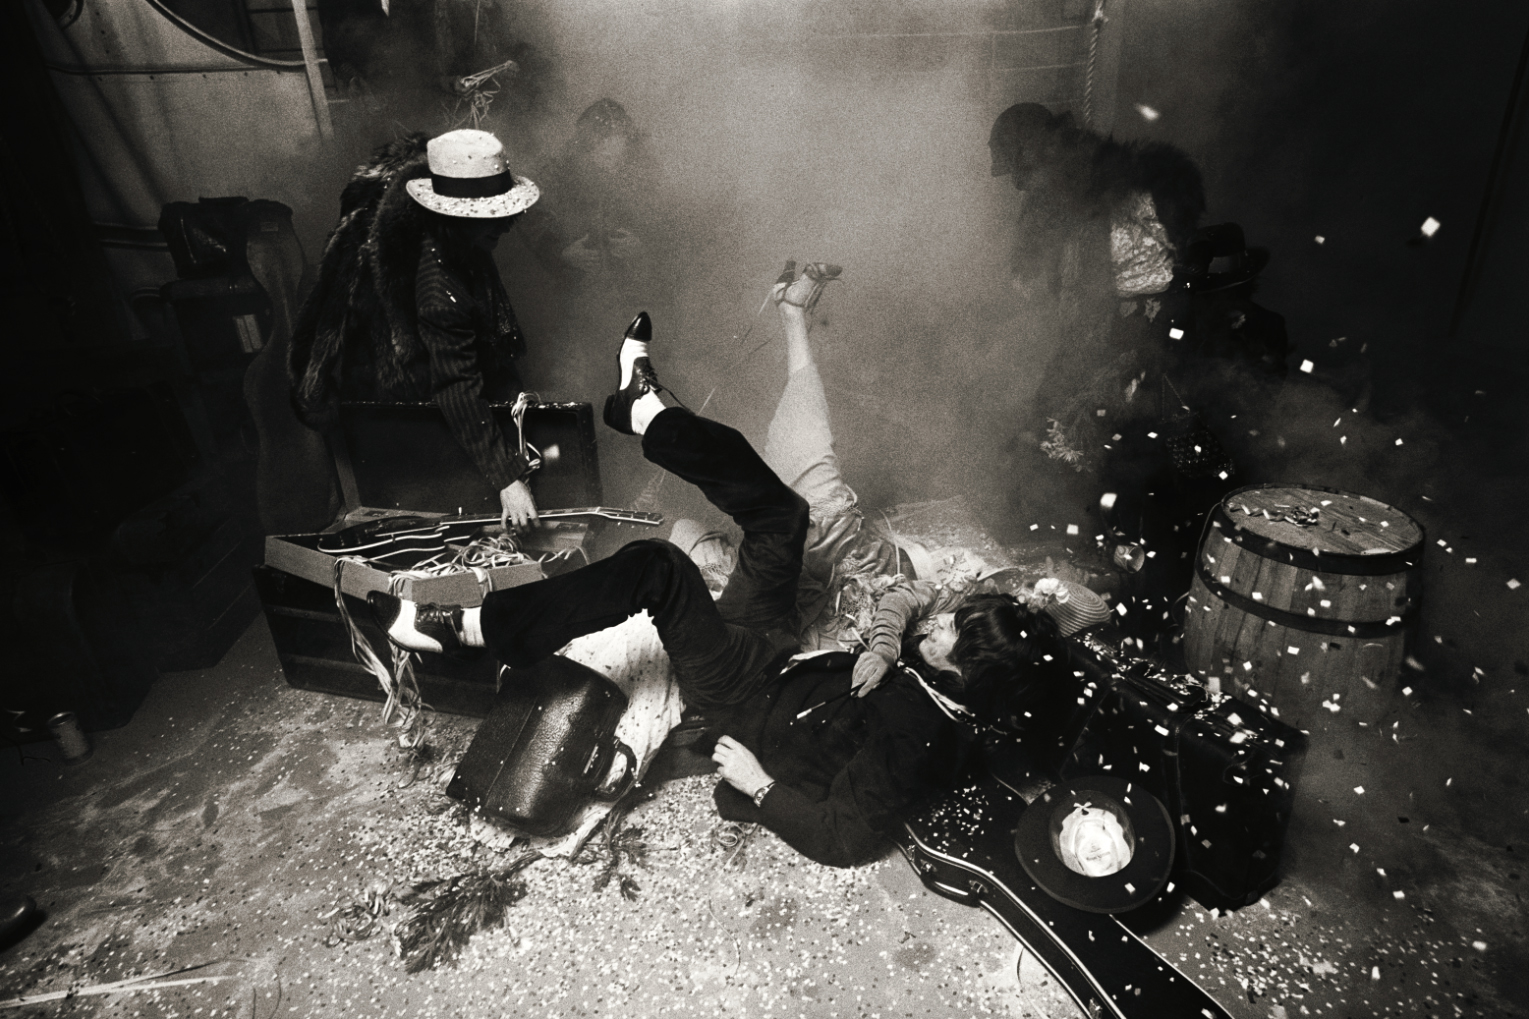 Norman Seeff, 'Rolling Stones, Exile on Main Street Postcards, Finale, 1971'